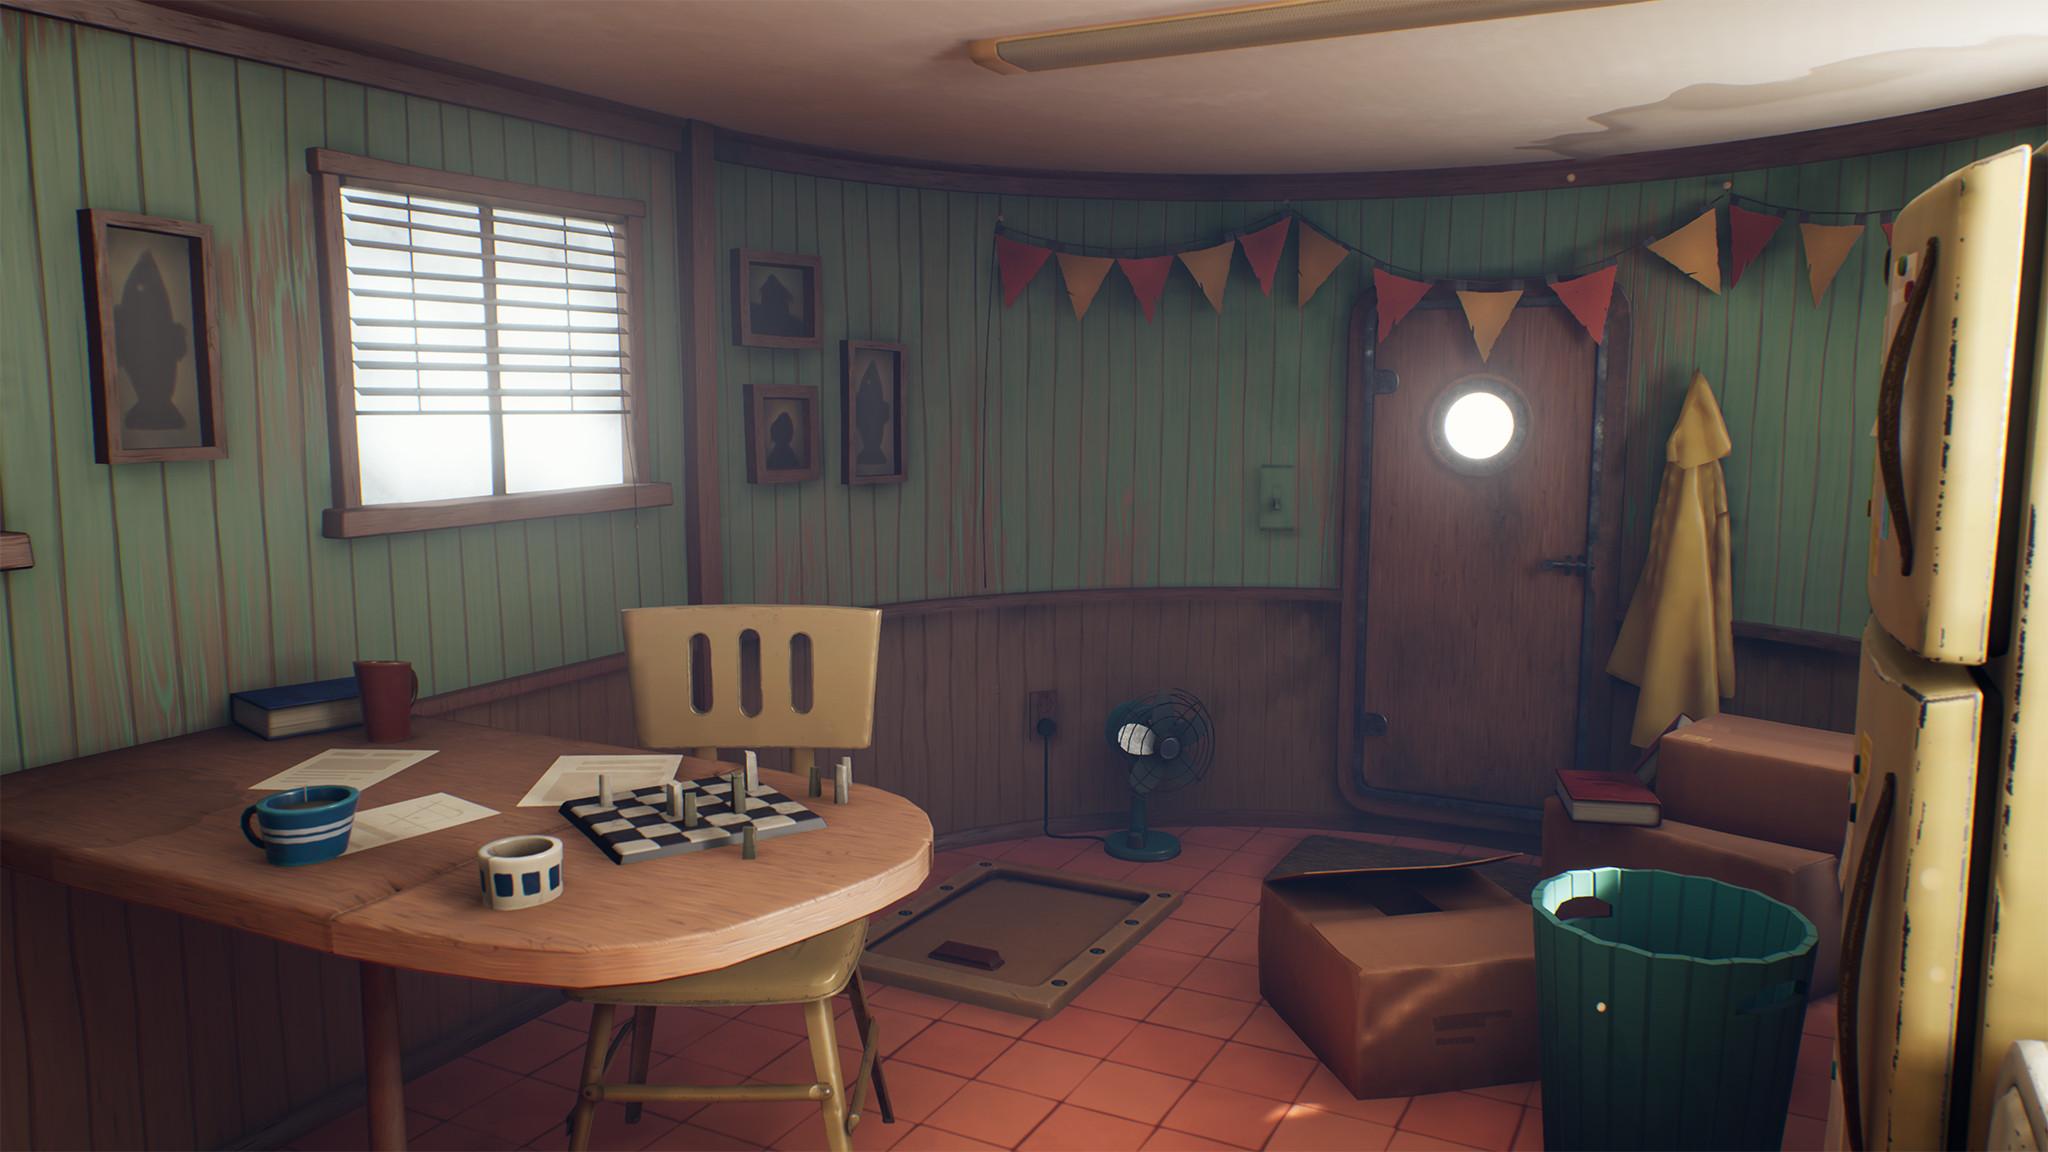 A render of a stylized tugboat interior kitchen